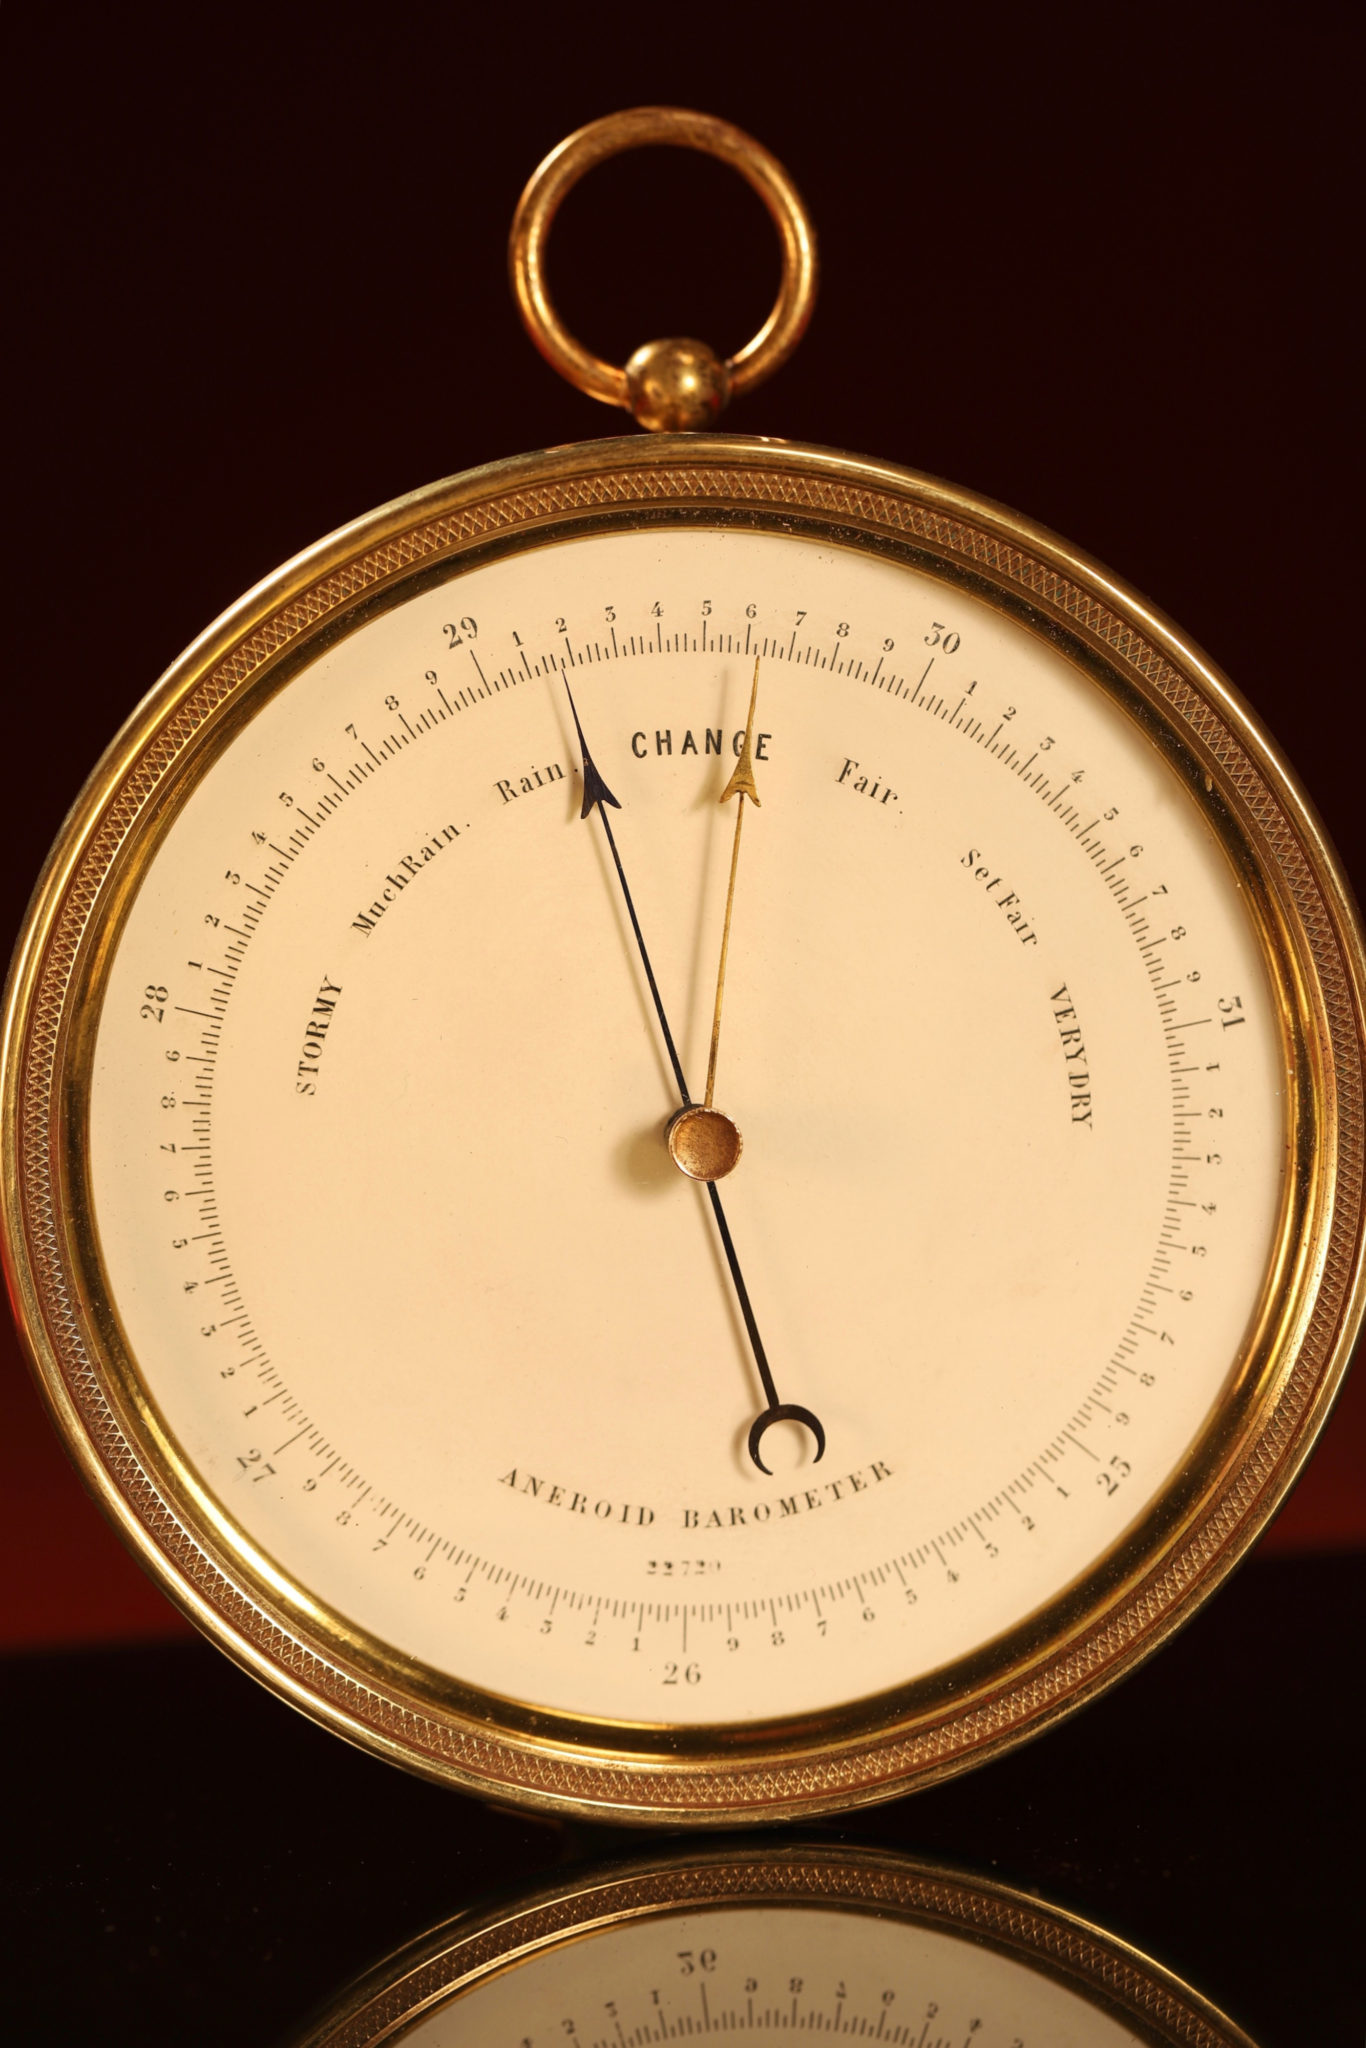 Image of Dent Barometer No 22720 in Chart Table Case